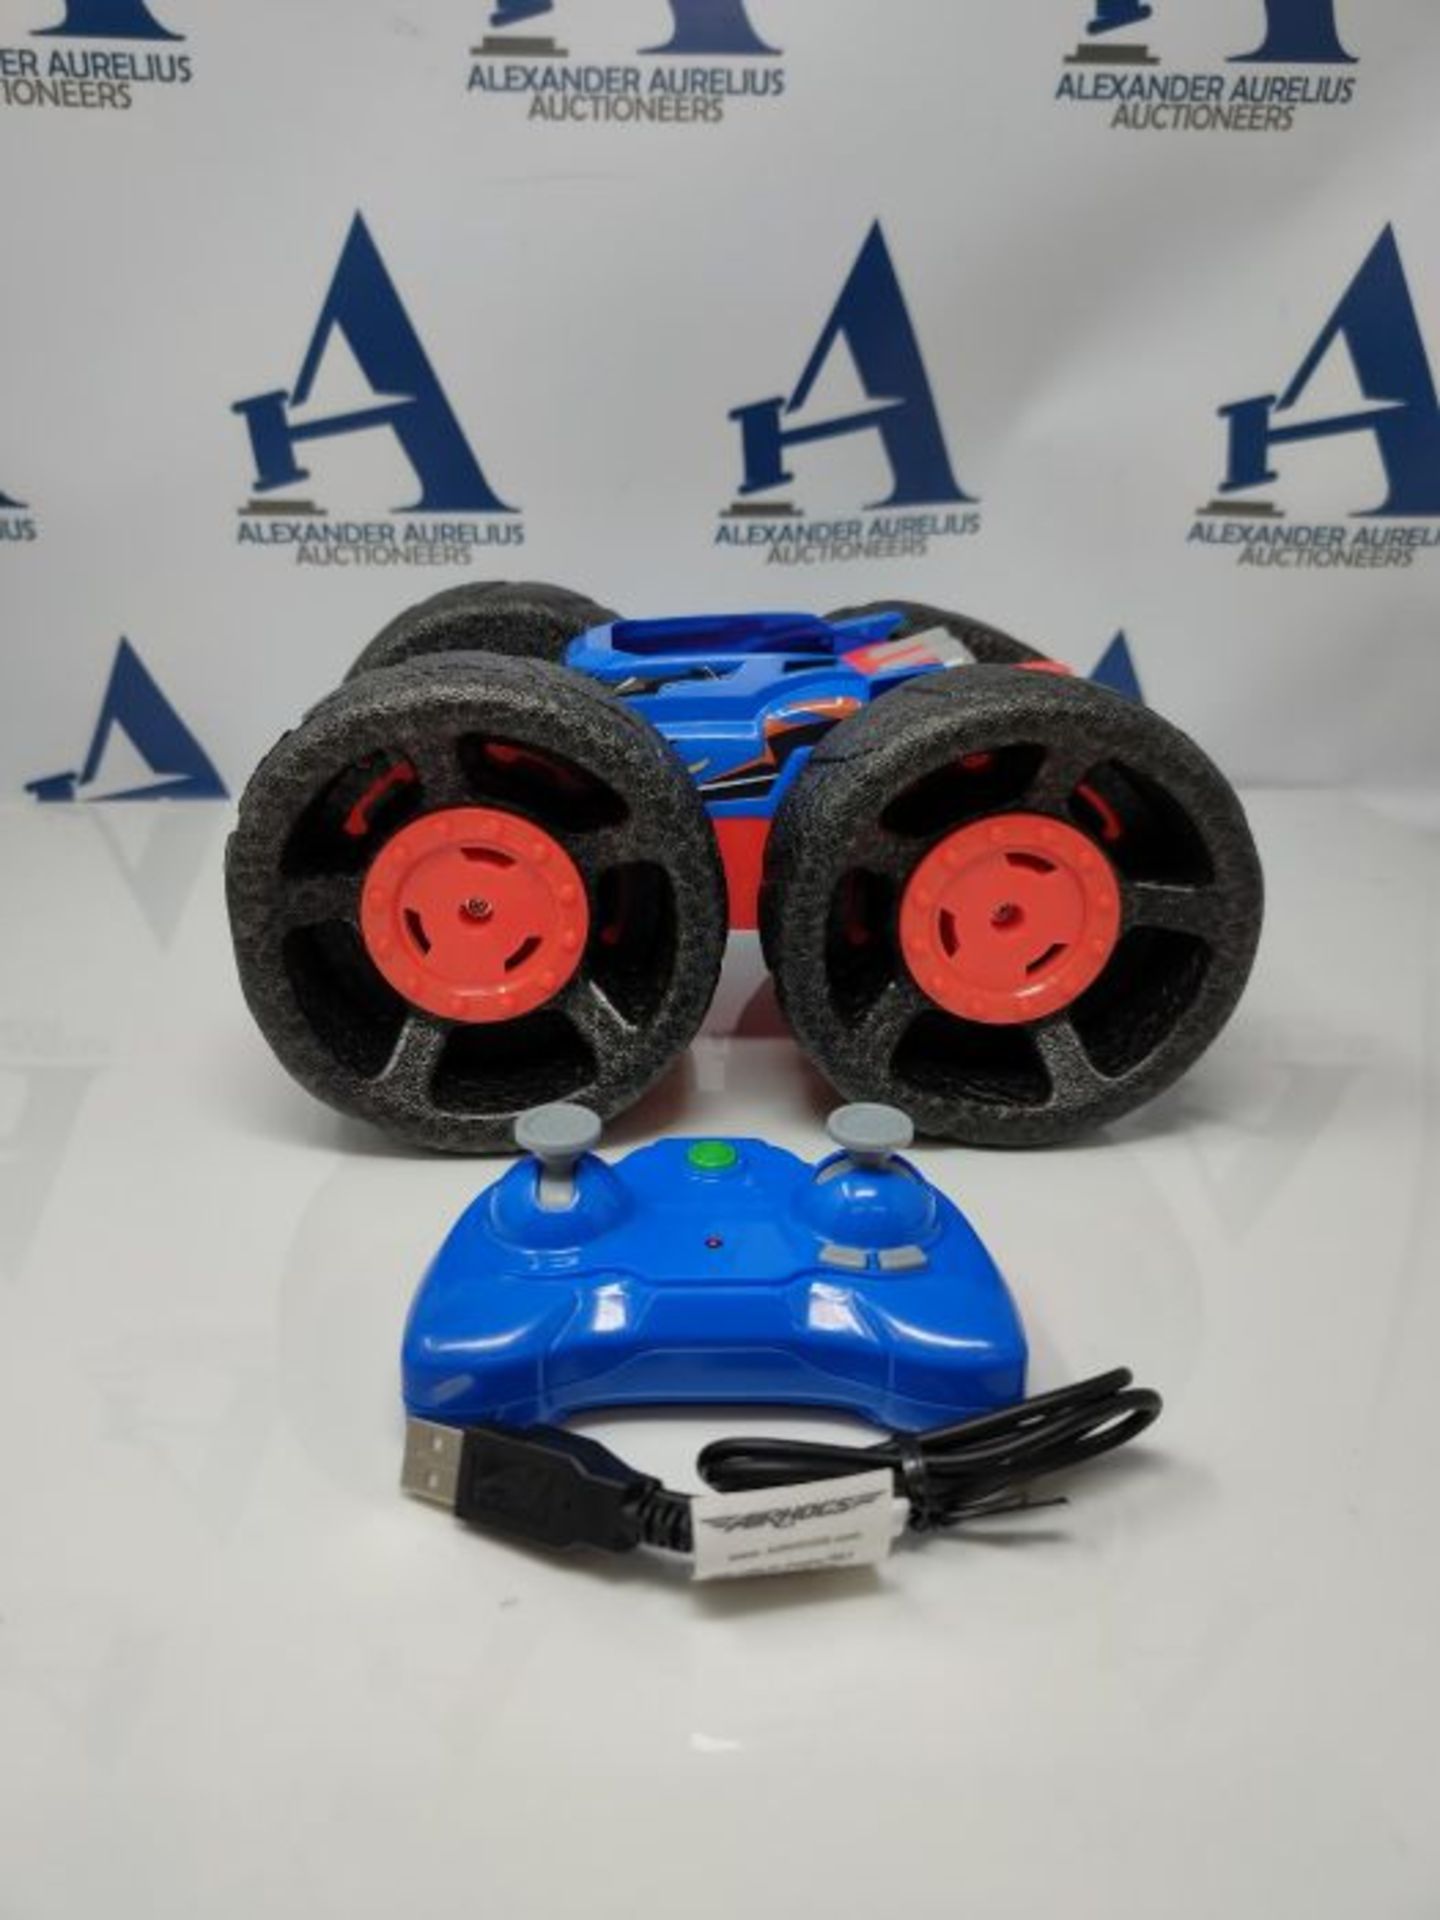 Air Hogs Super Soft, Jump Fury with Zero-Damage Wheels, Extreme Jumping Remote Control - Image 2 of 3